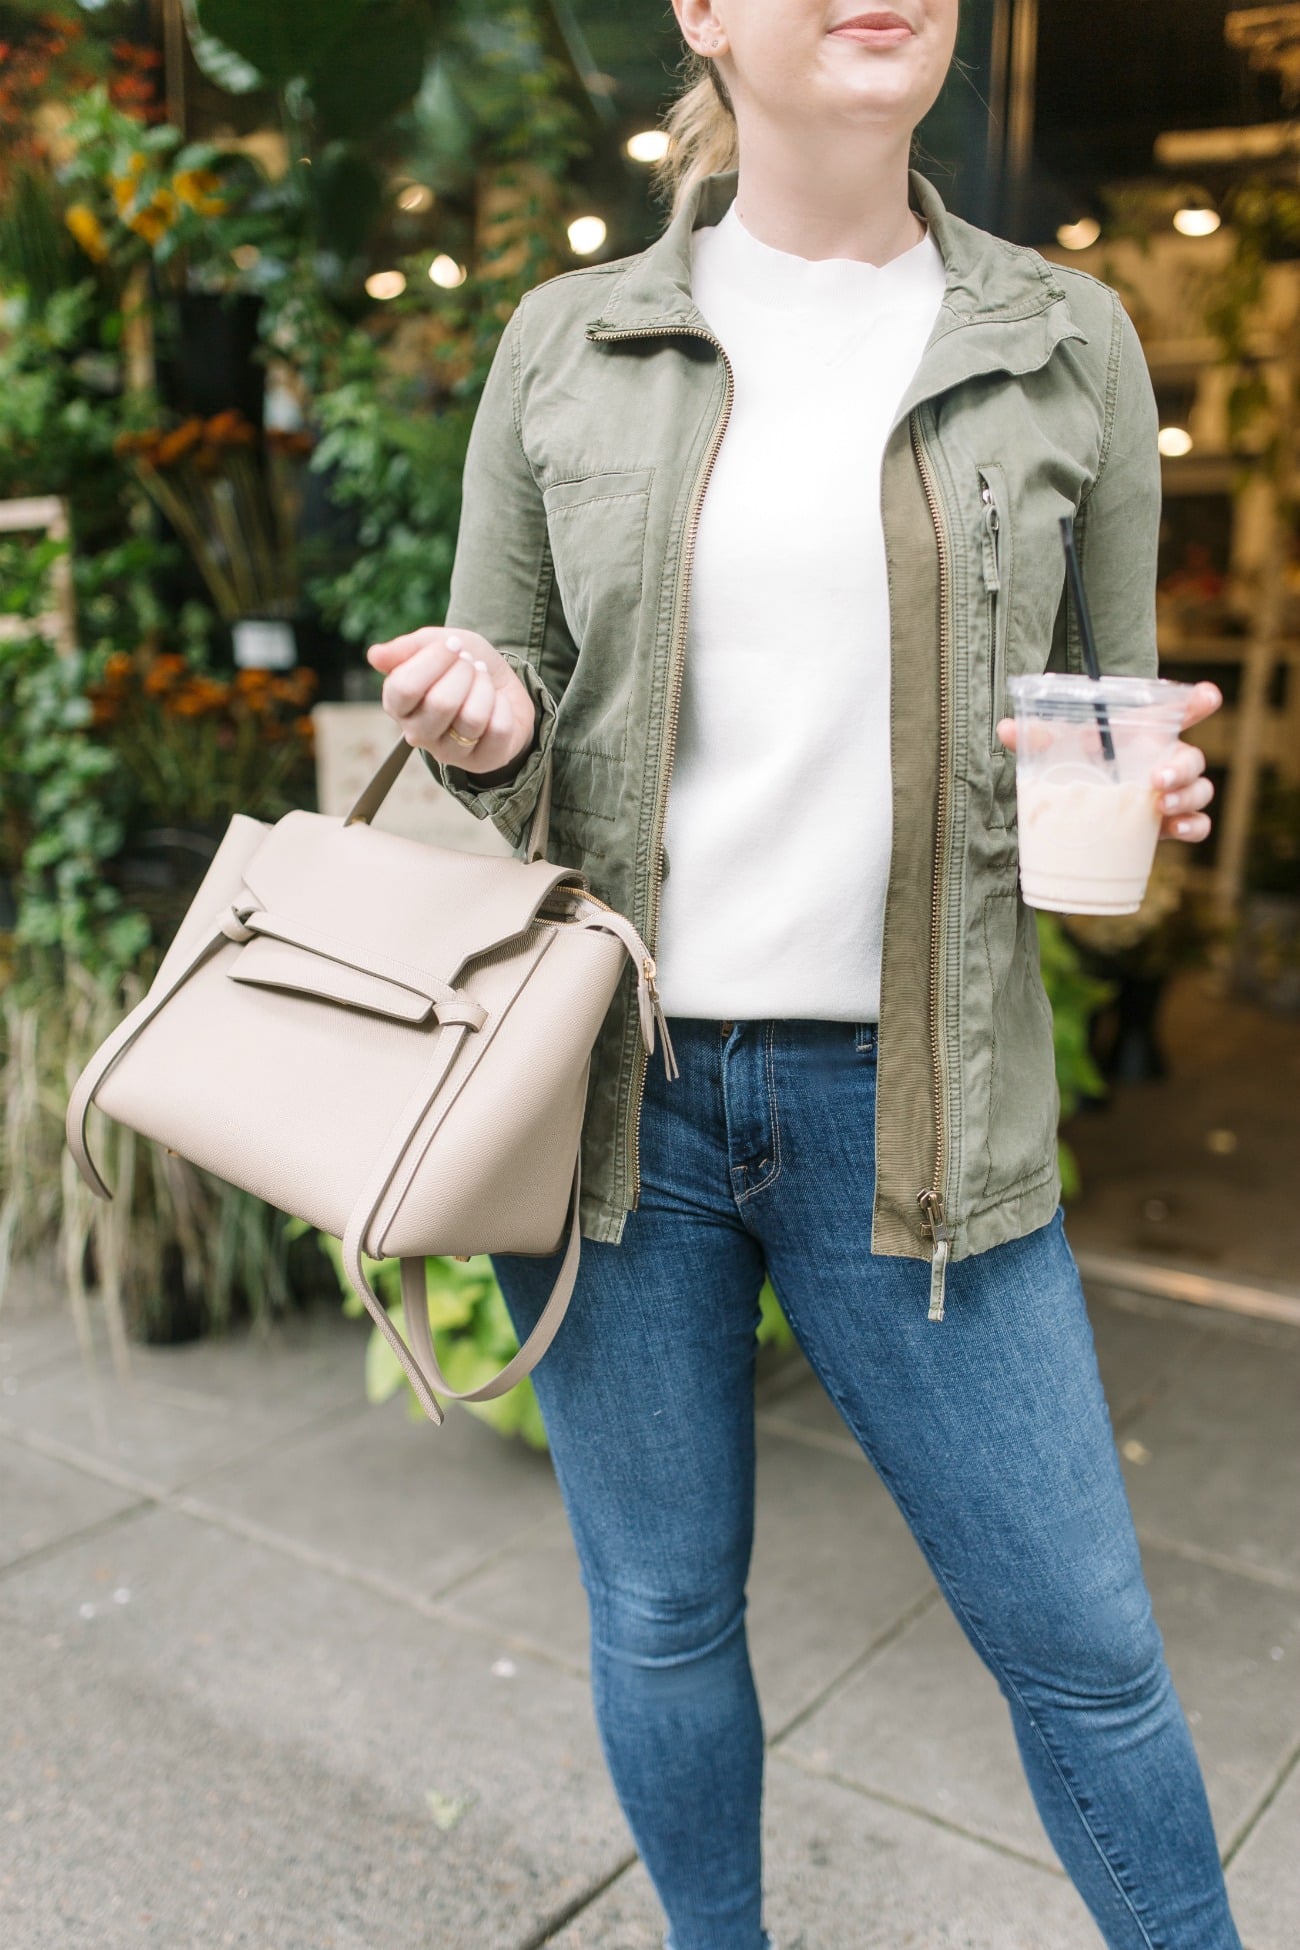 Wardrobe Favorites Under $200, 48 Hours in Portland I wit & whimsy Guide